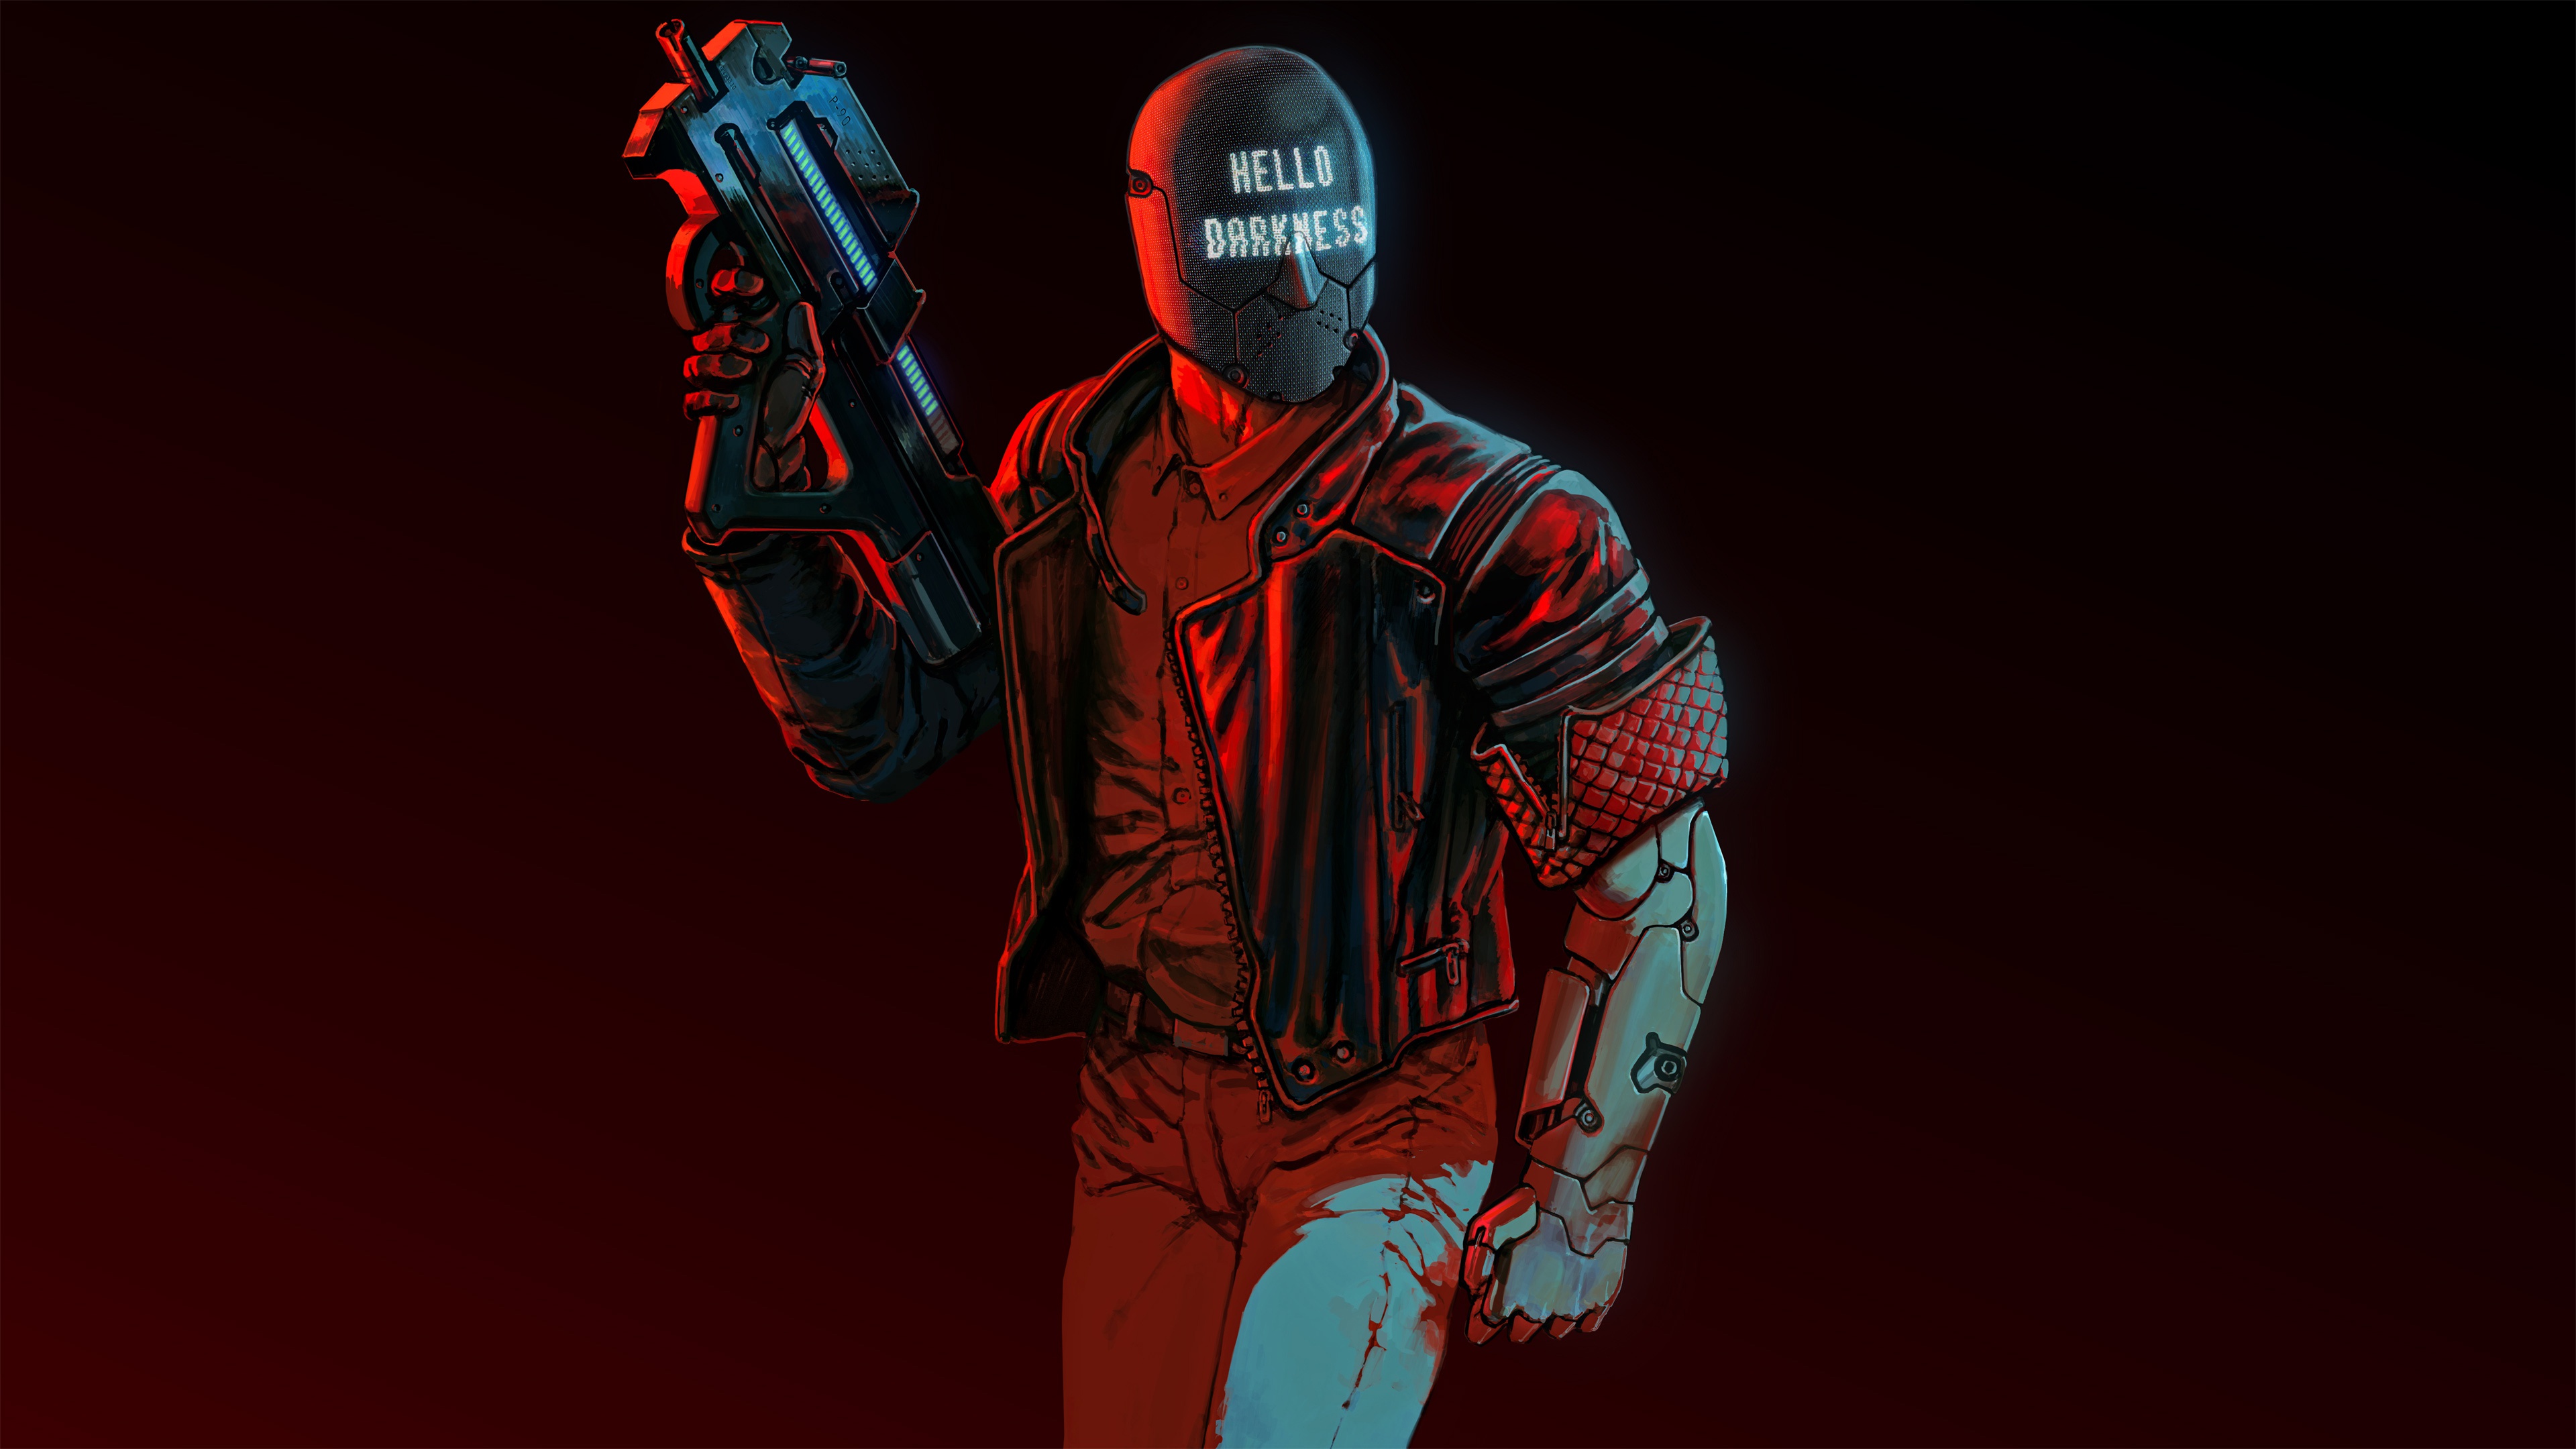 Video Game Ruiner HD Wallpaper | Background Image